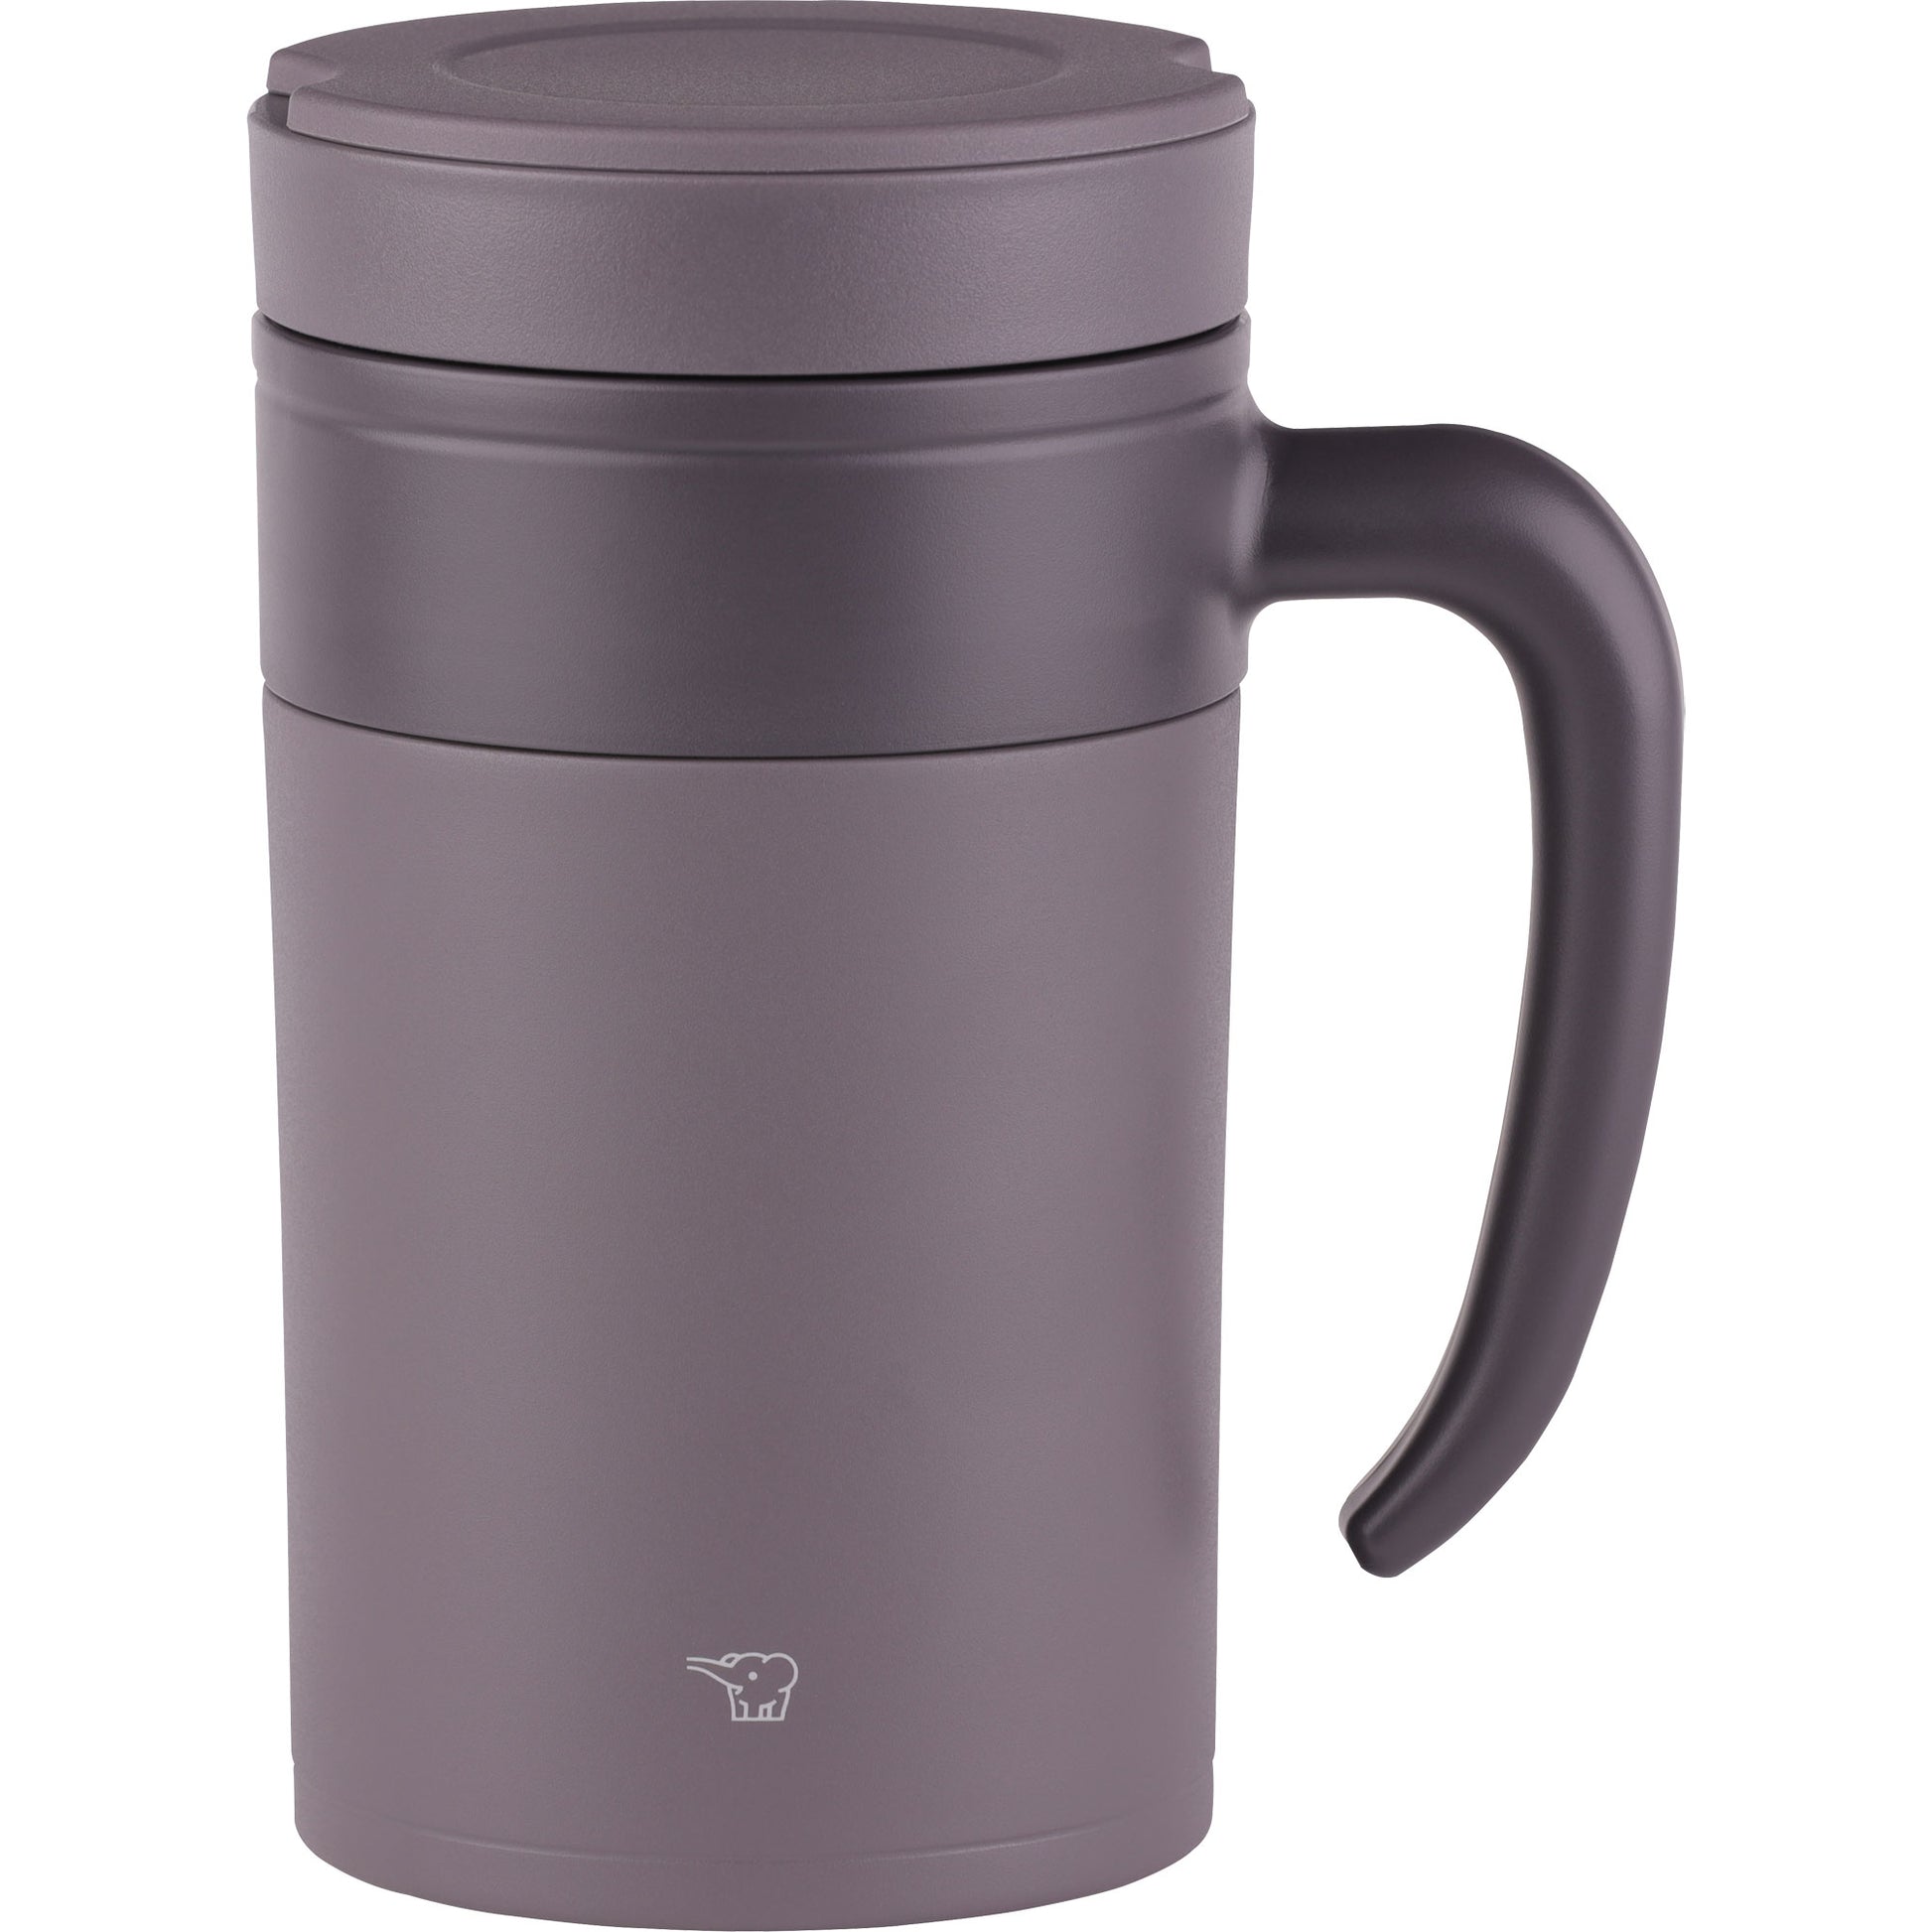  Reusable Coffee Cup with Lid and Handle - Stainless